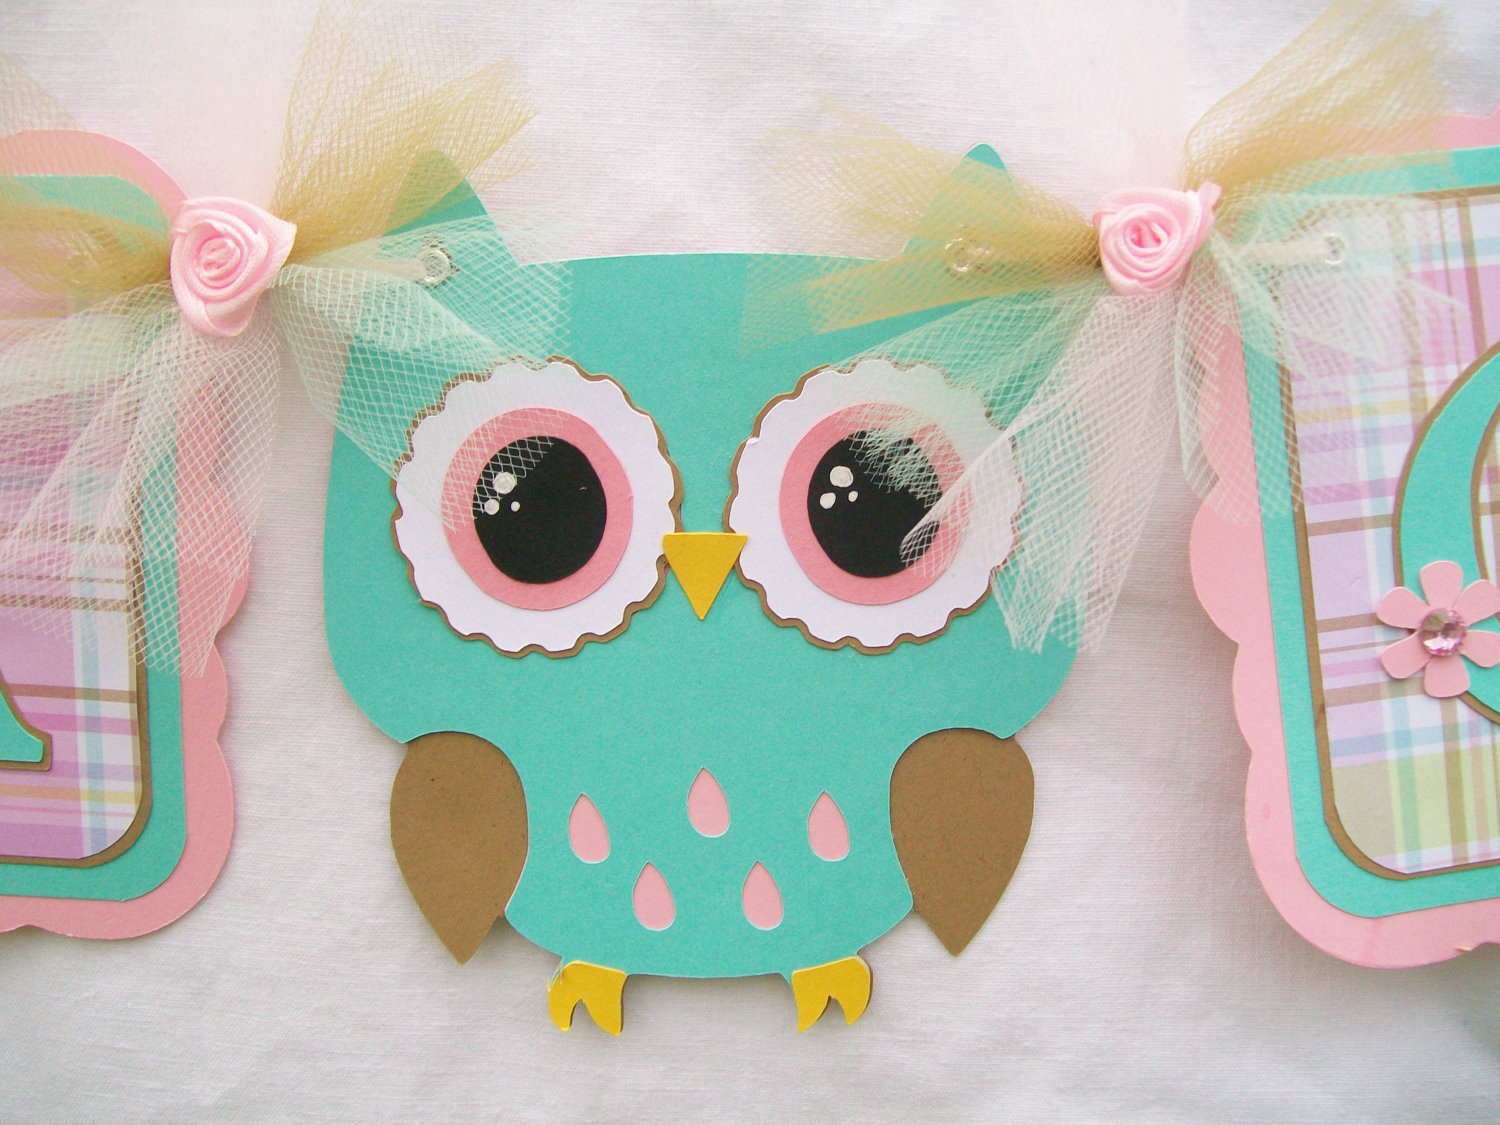 Baby Owl Decor
 Owl baby shower owl banner owl baby owl decorations baby